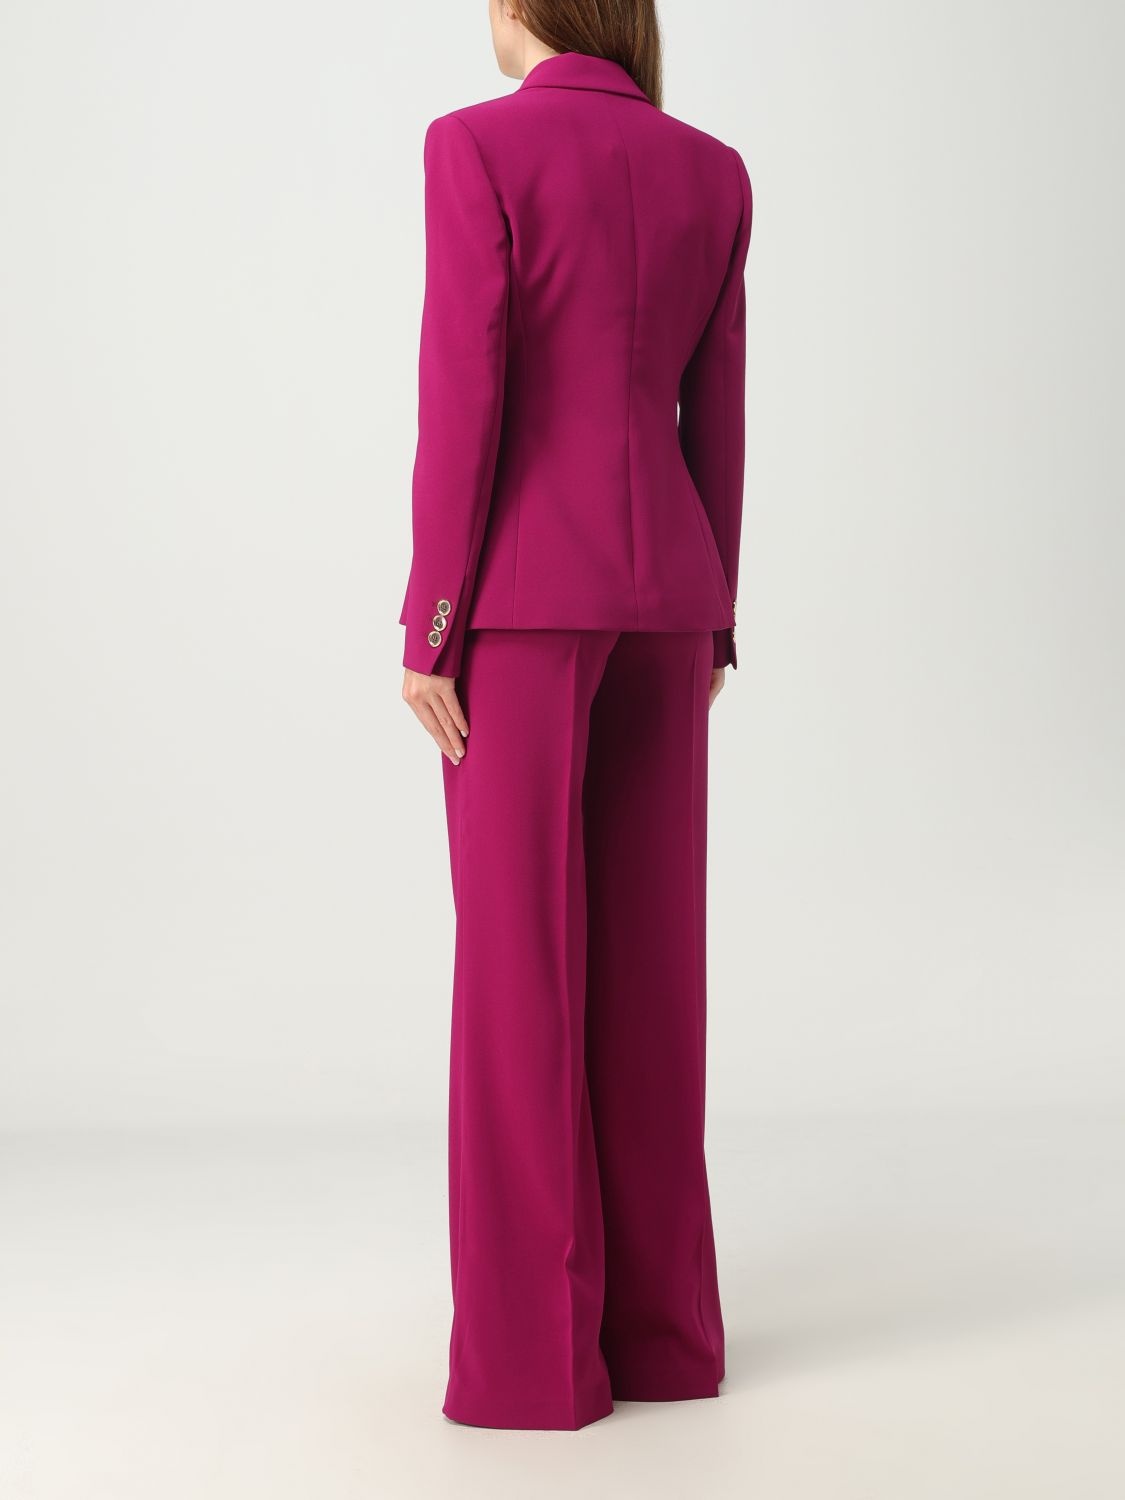 Pinko suit for woman - 3